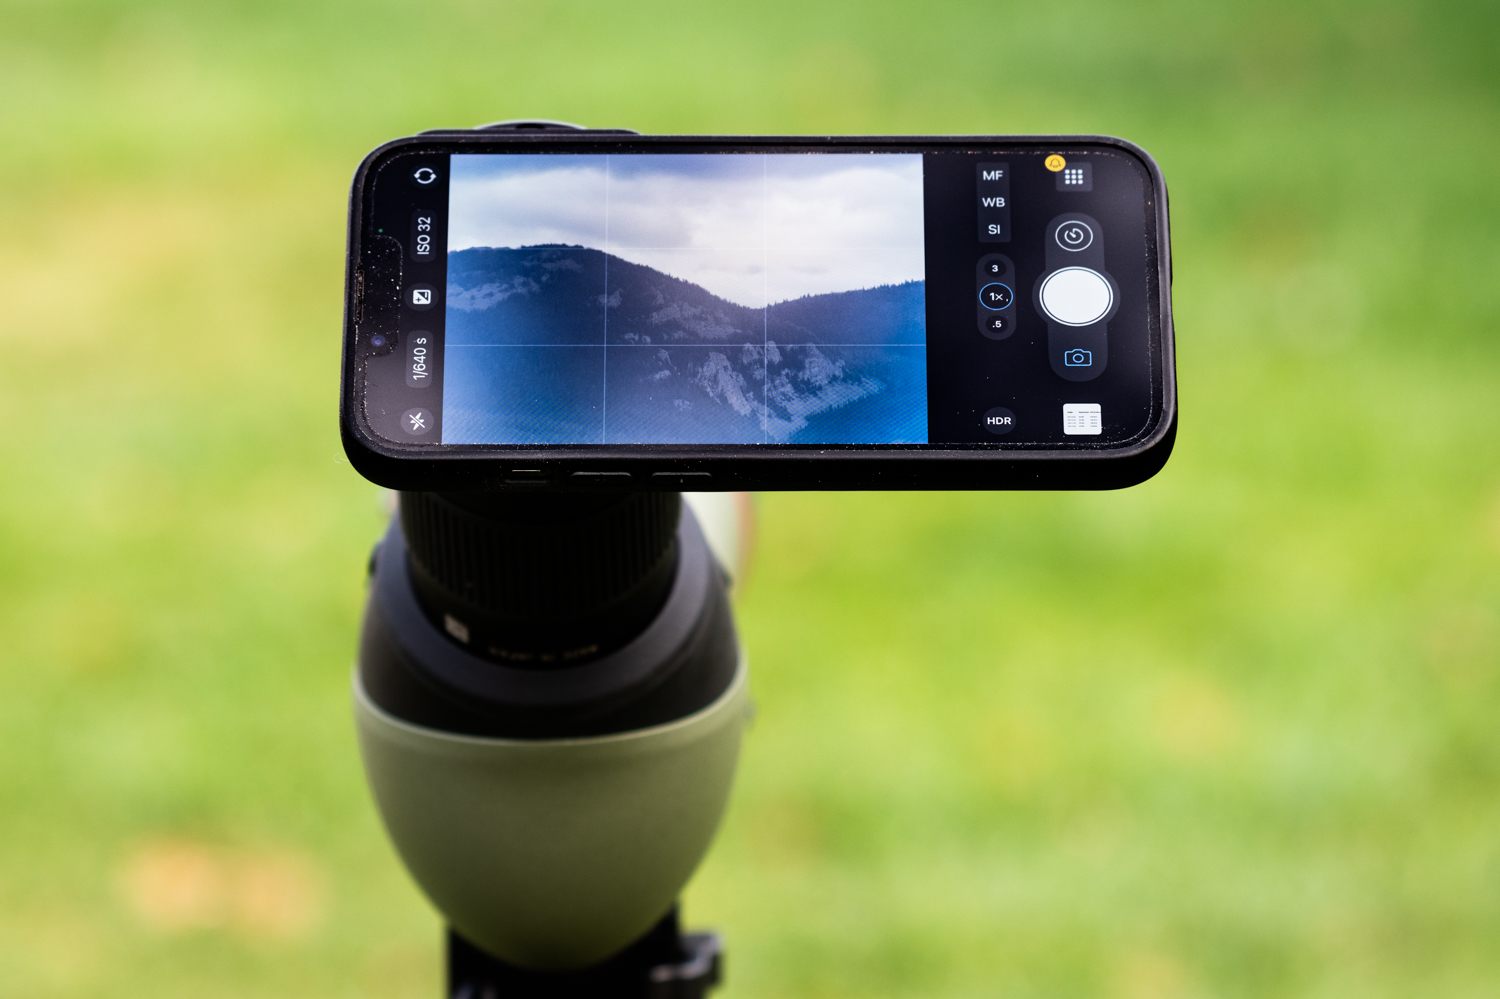 The TE-80XW is stunning for digiscoping, allowing for vignette-free captures without zooming the phone camera.